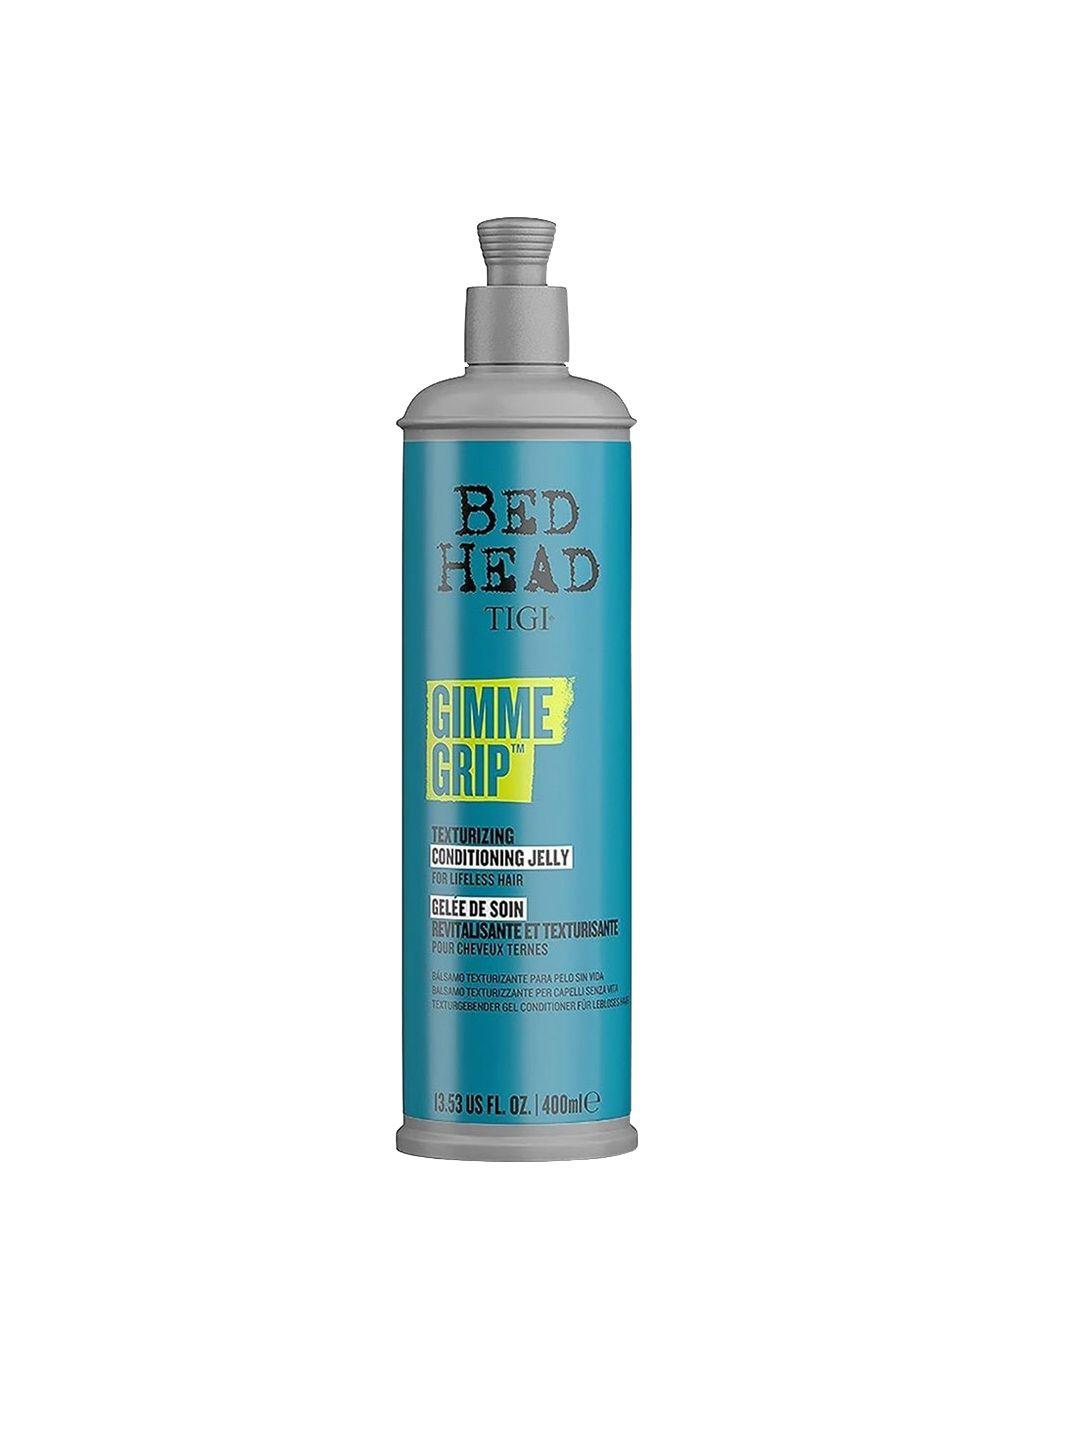 tigi bed head gimme grip texturizing conditioning jelly for lifeless hair - 400 ml